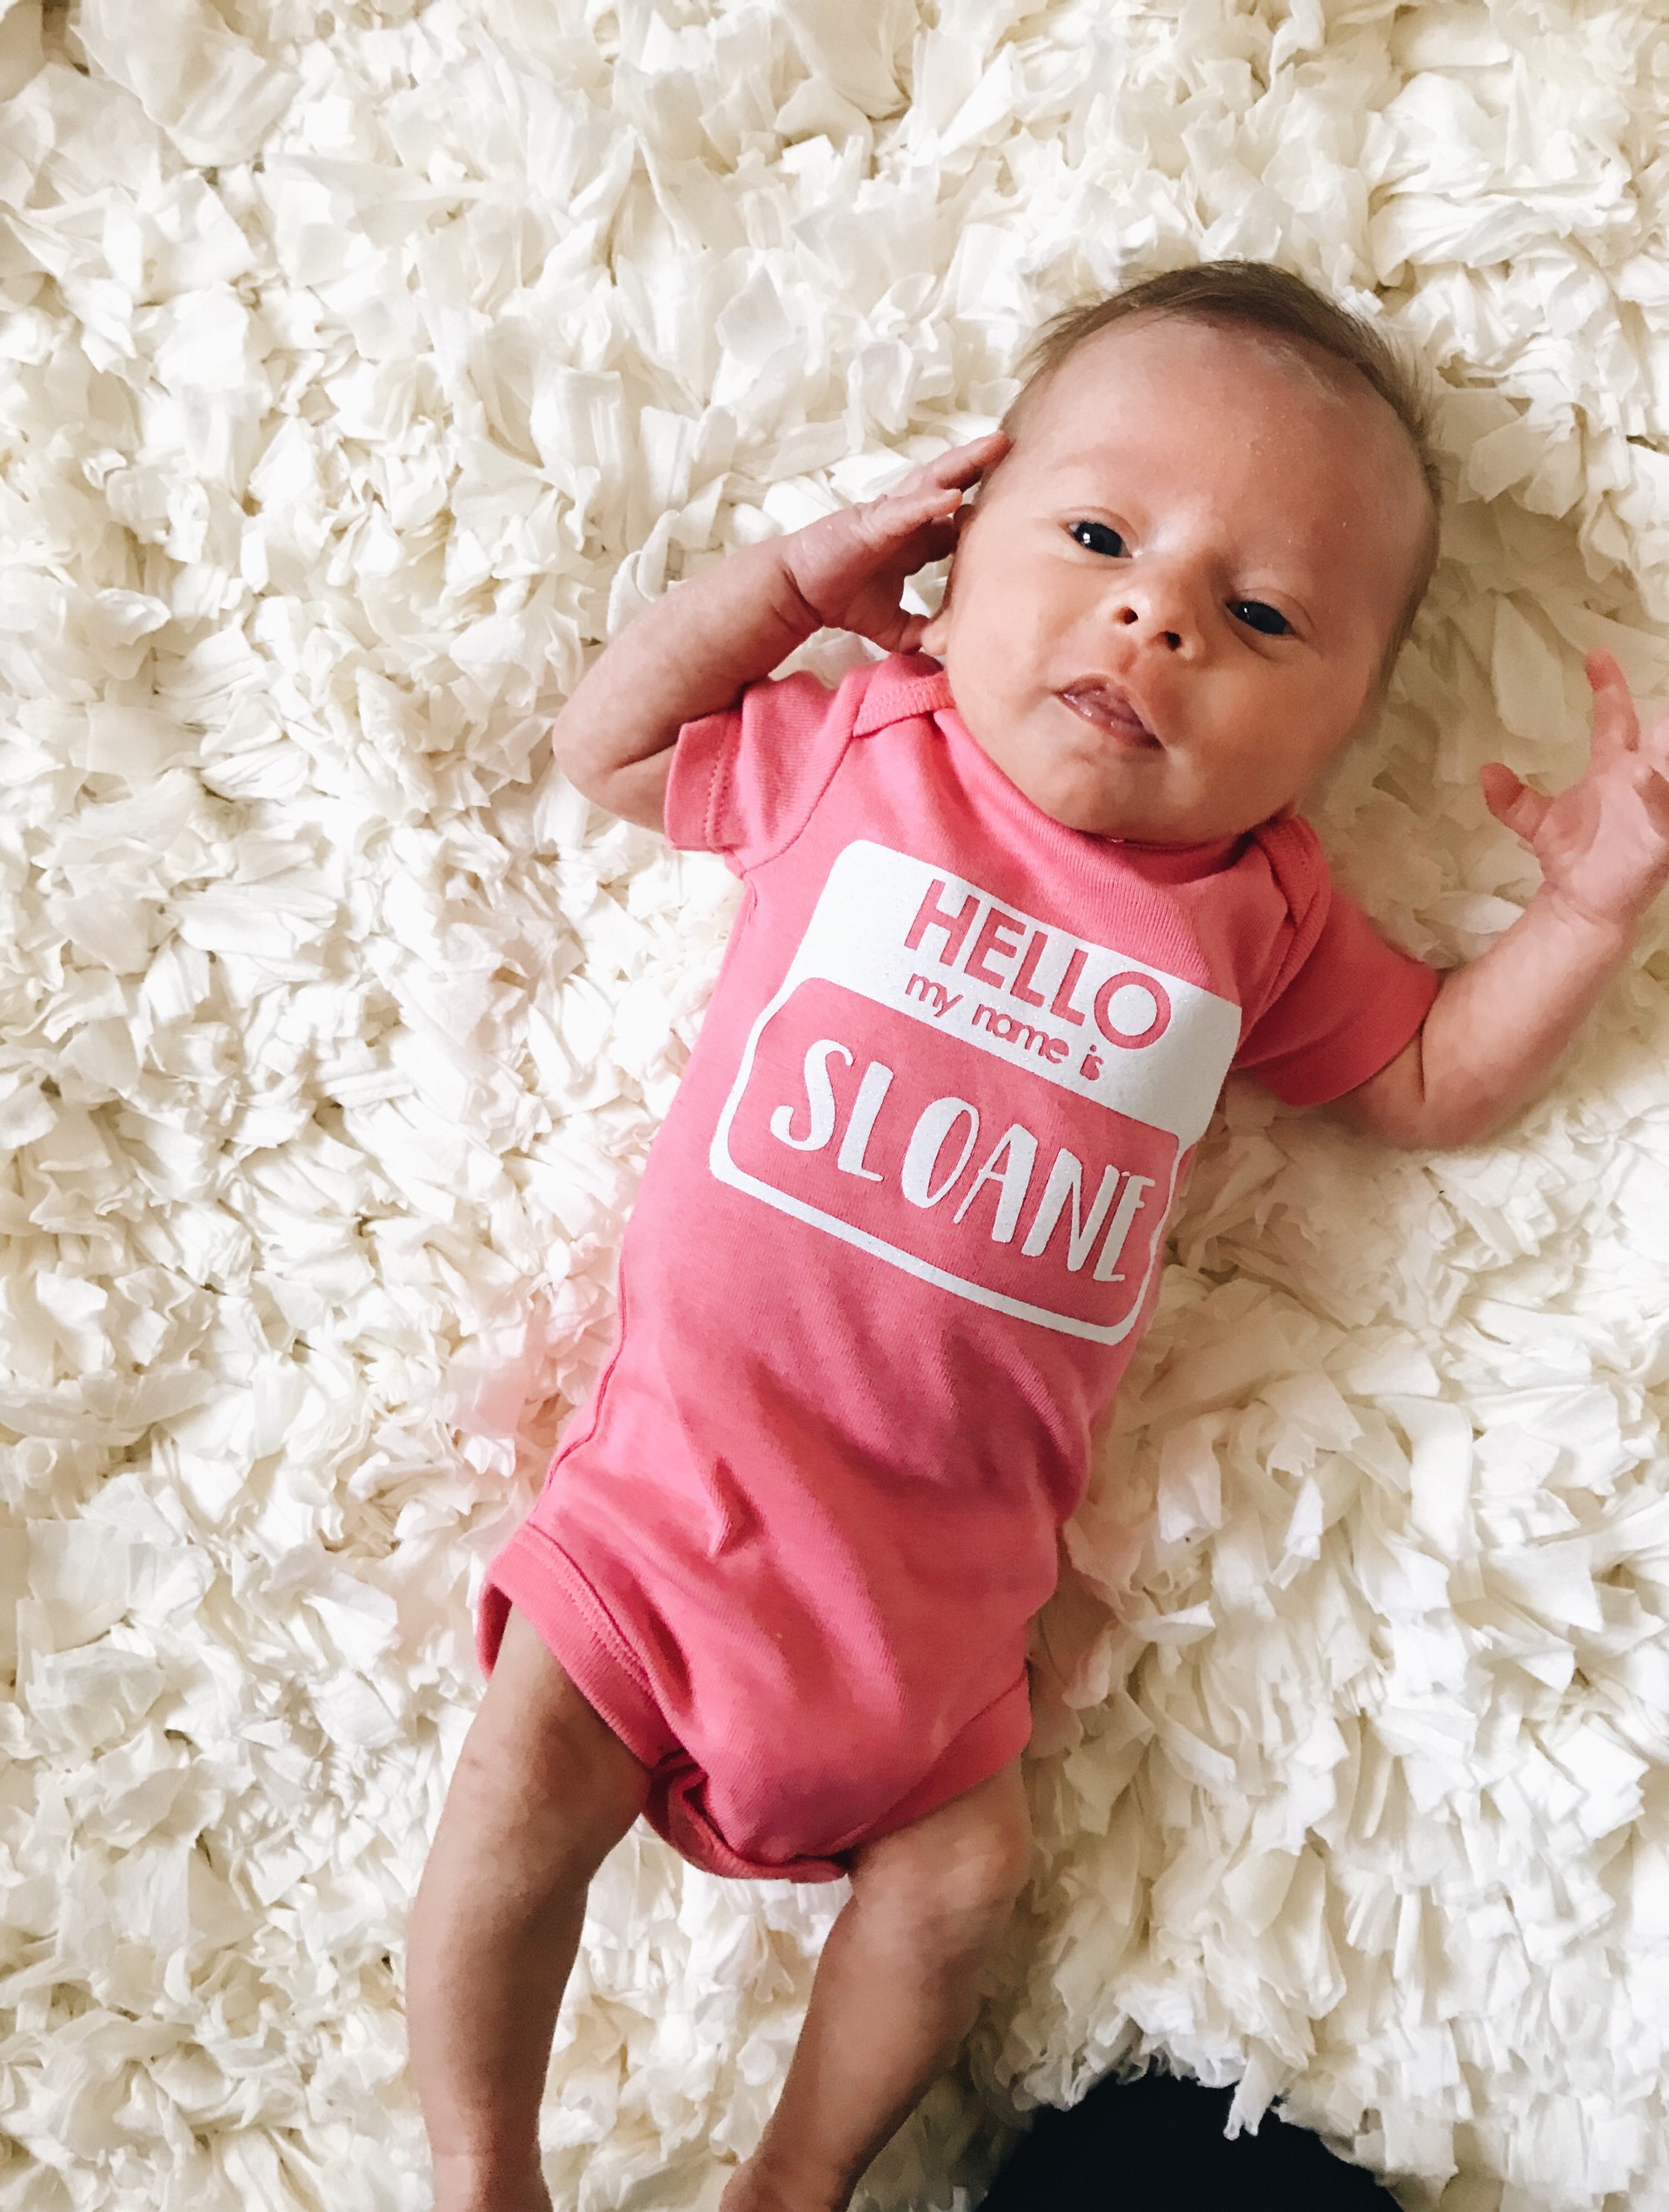 Baby Update: Sloane at One Month